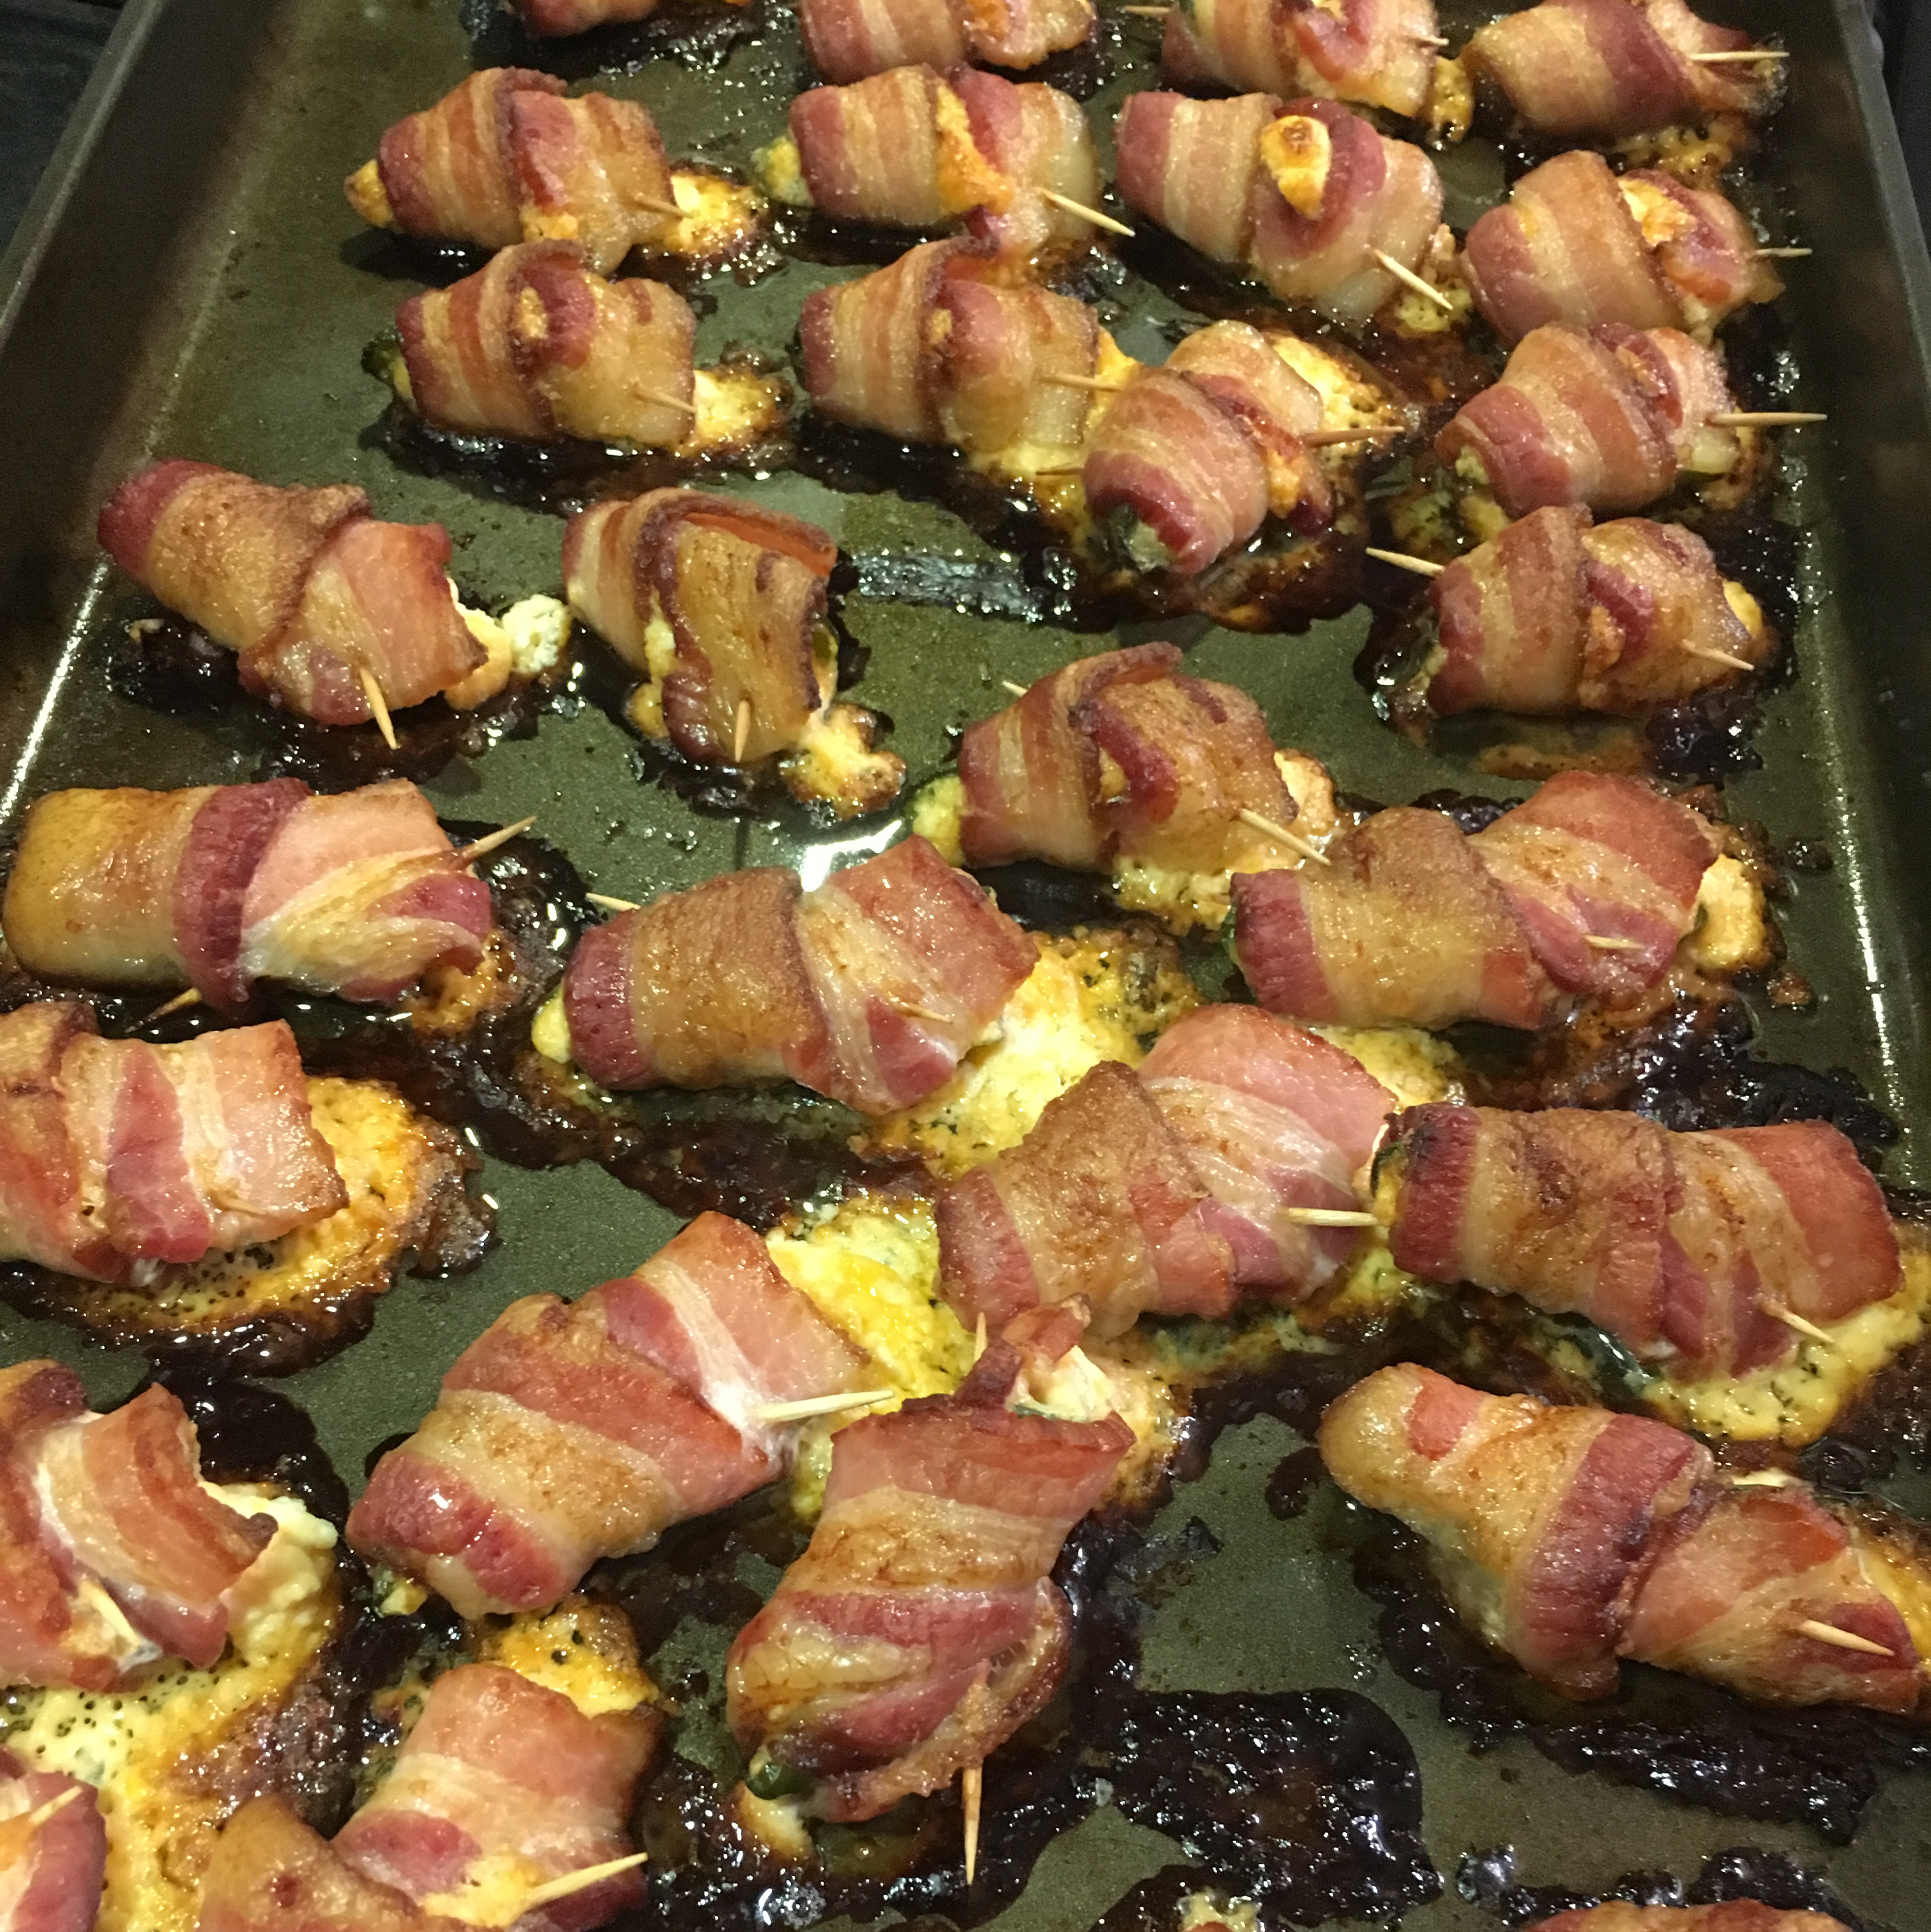 Bacon Wrapped Jalapeno Poppers Recipe Allrecipes,What Is Triple Sec Syrup